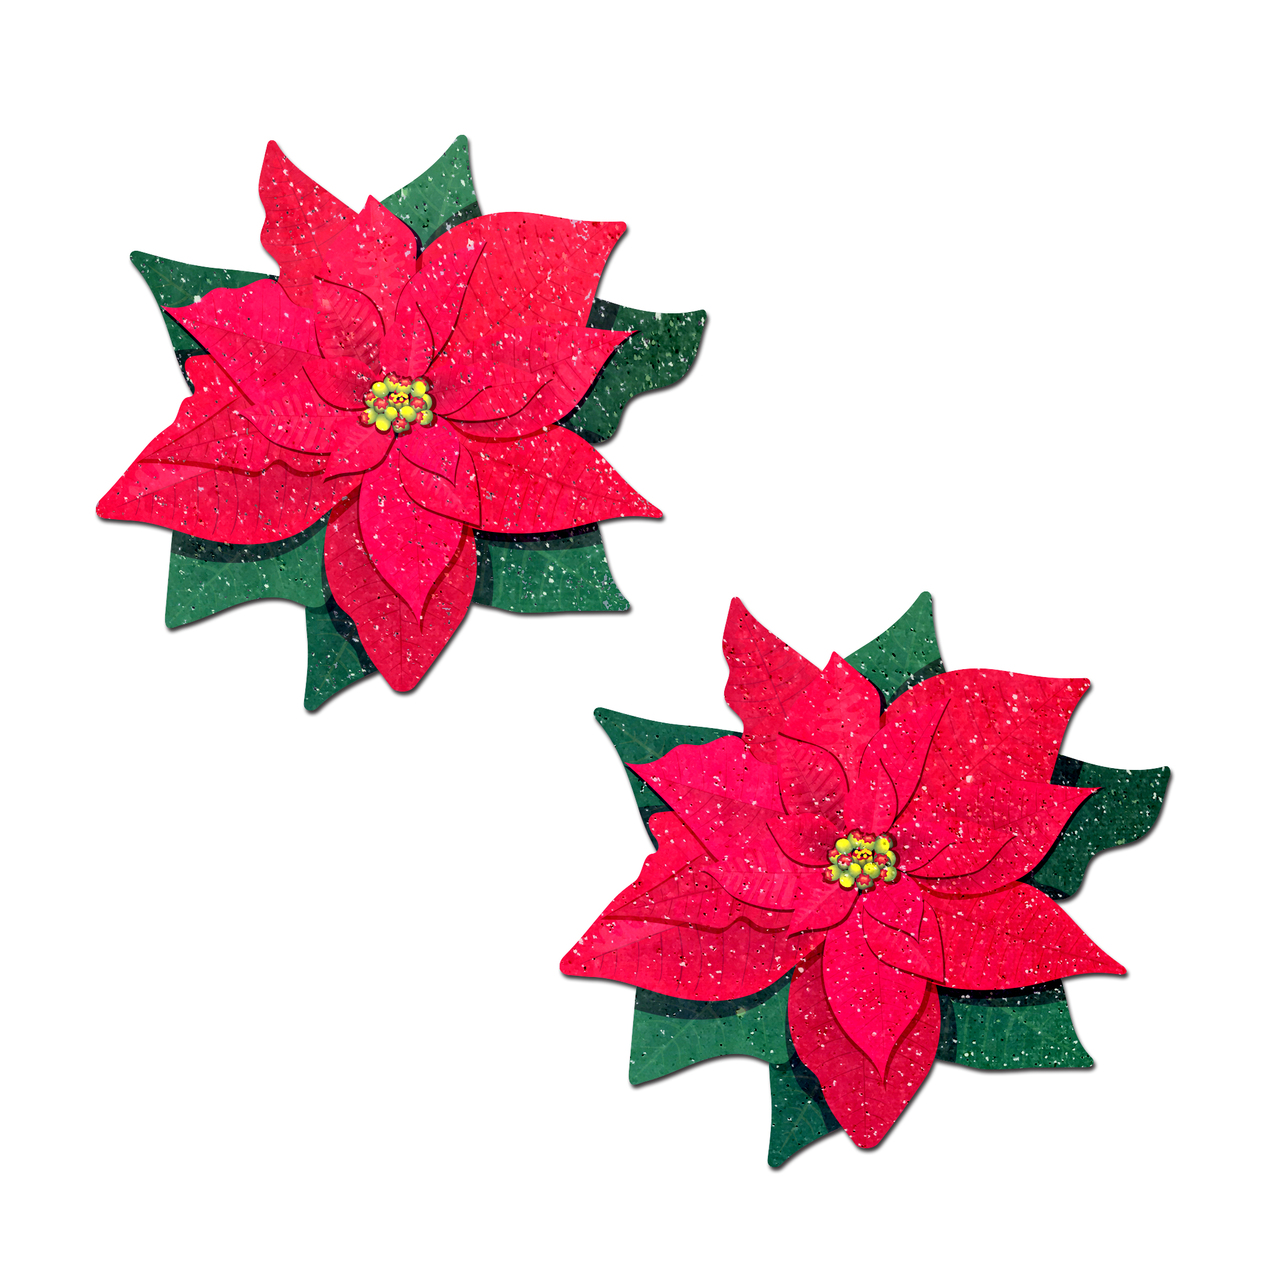 PASTEASE WINTER POINSETTIA RED & GREEN